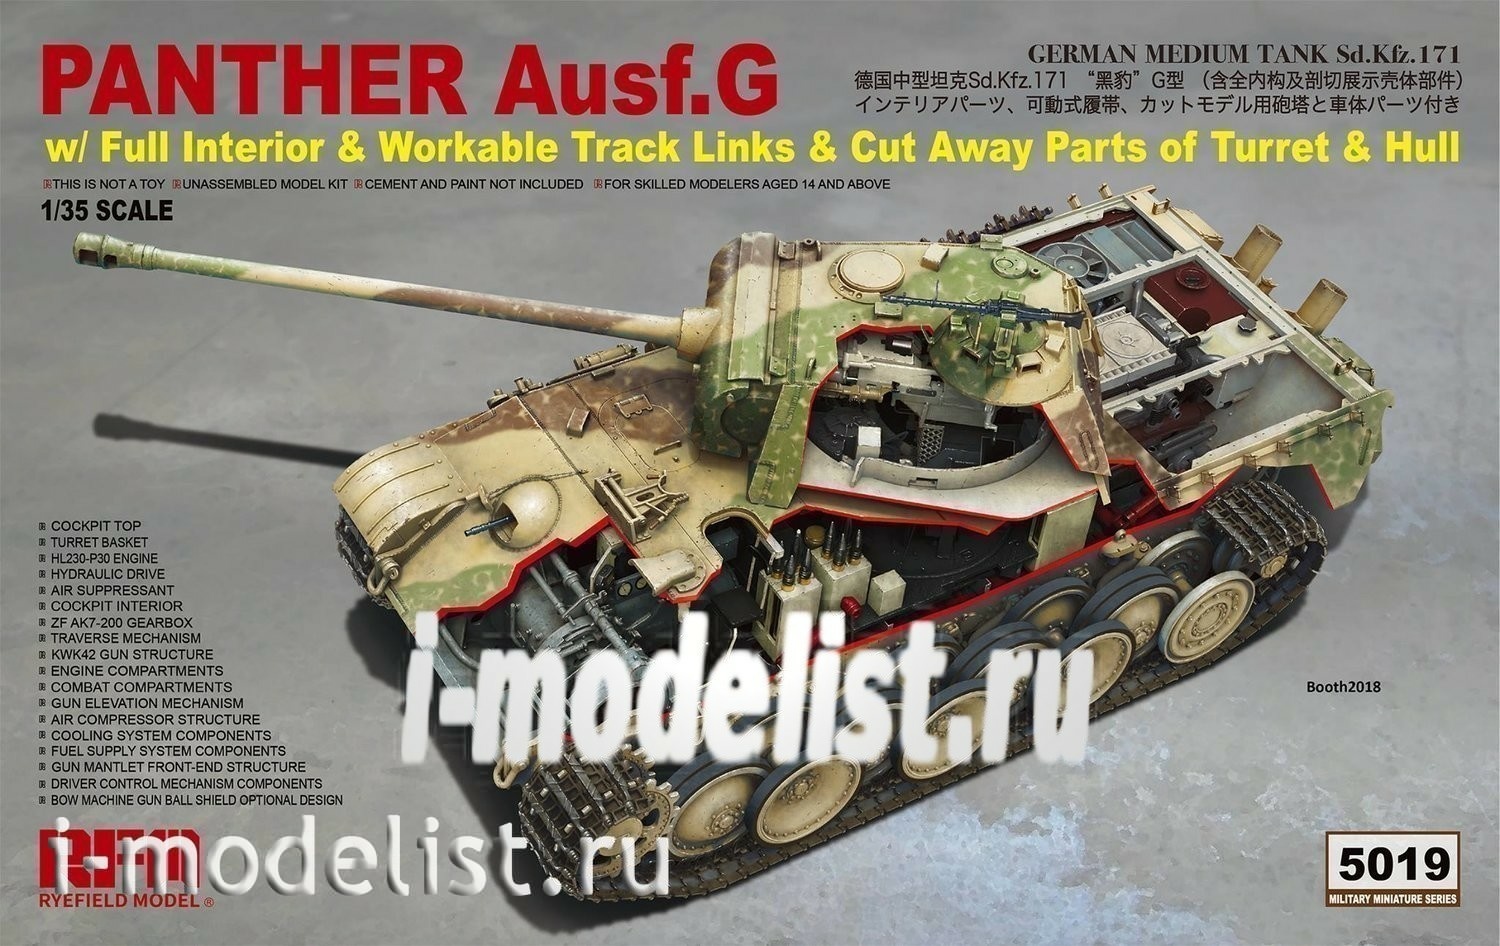 RM-5019 Rye Field Model 1/35 PANTHER AUSF.G SD.KFZ.171 W/FULL INTERIOR & WORKABLE TRACK LINKS & CUT AWAY PARTS OF TURRET & HULL